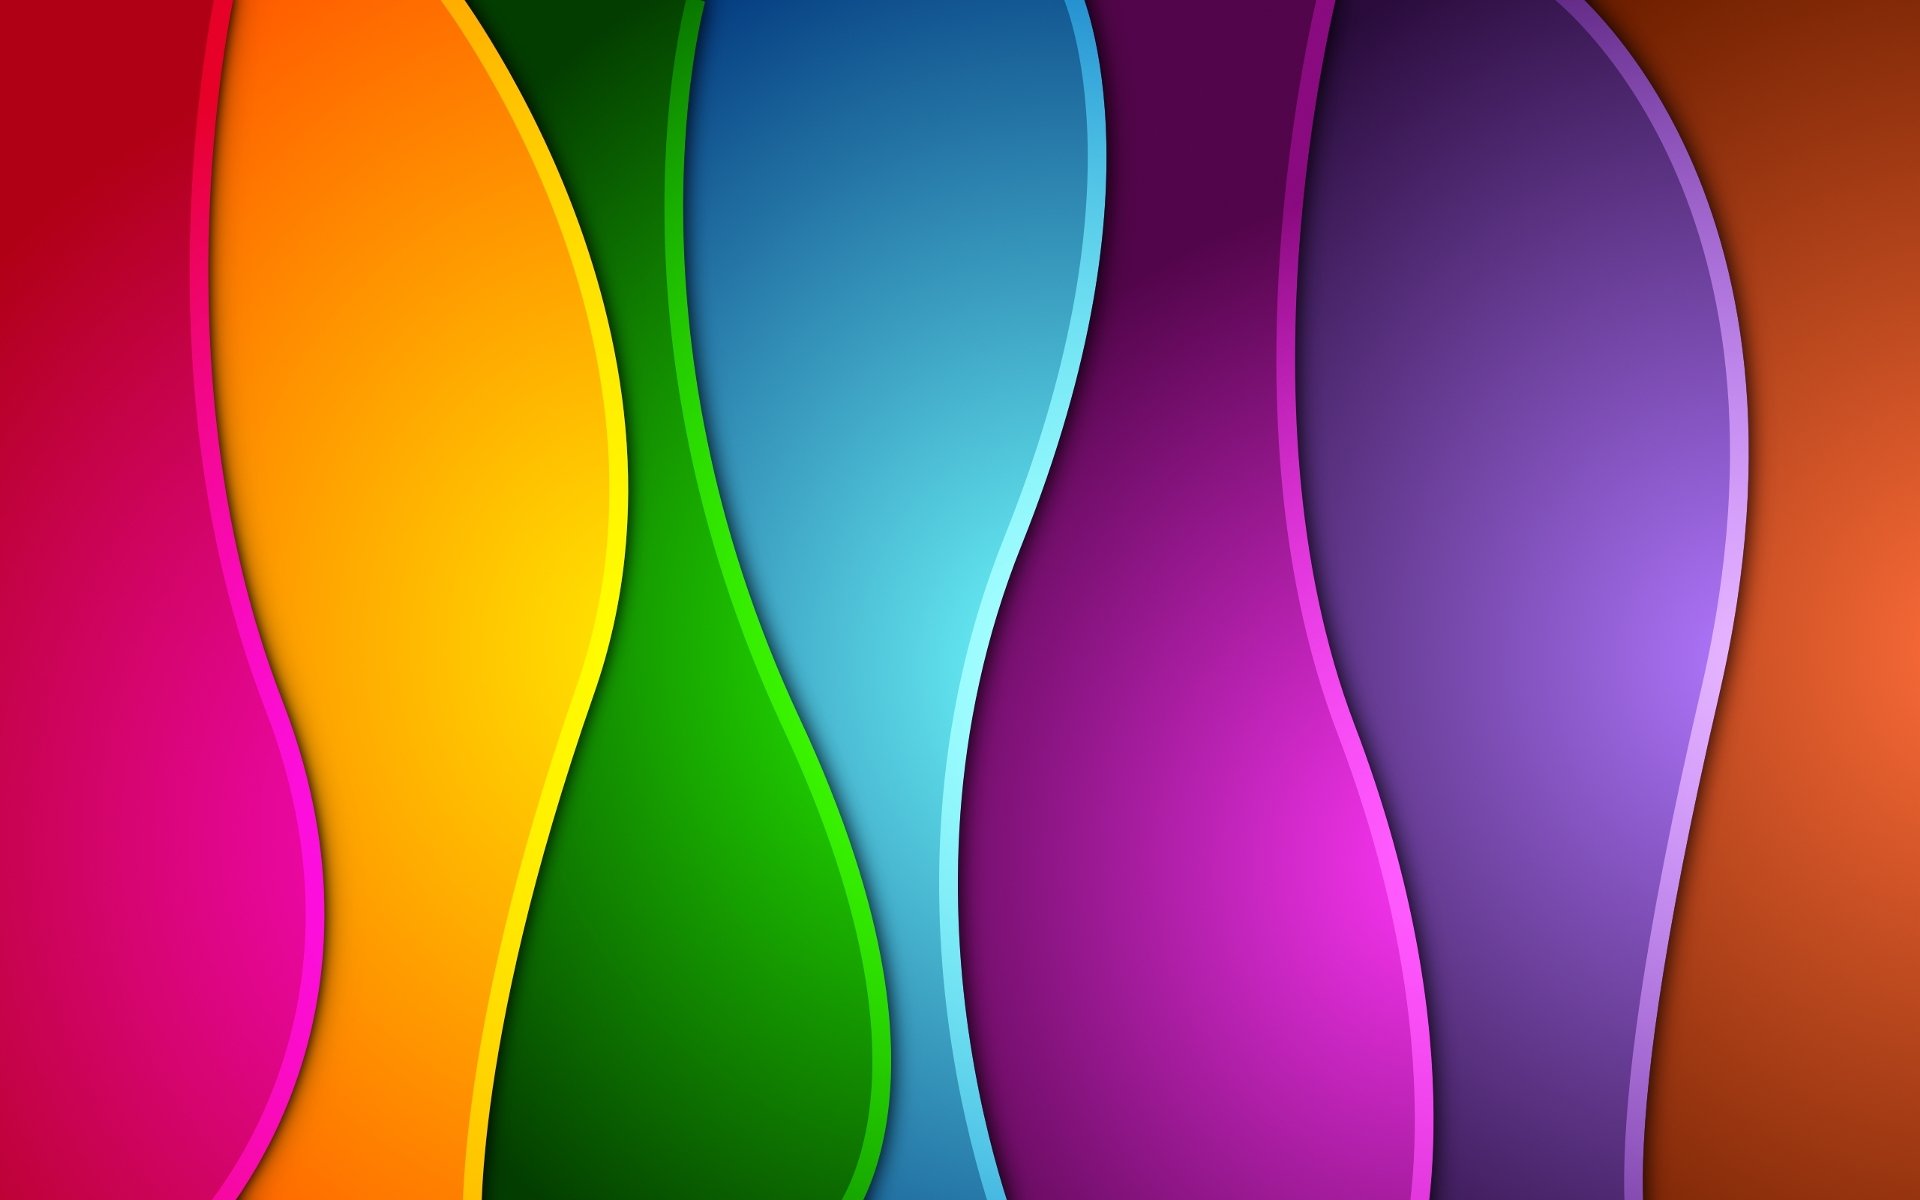 Wallpapers Sites For Mobile - Full Hd Colorful Patterns - HD Wallpaper 